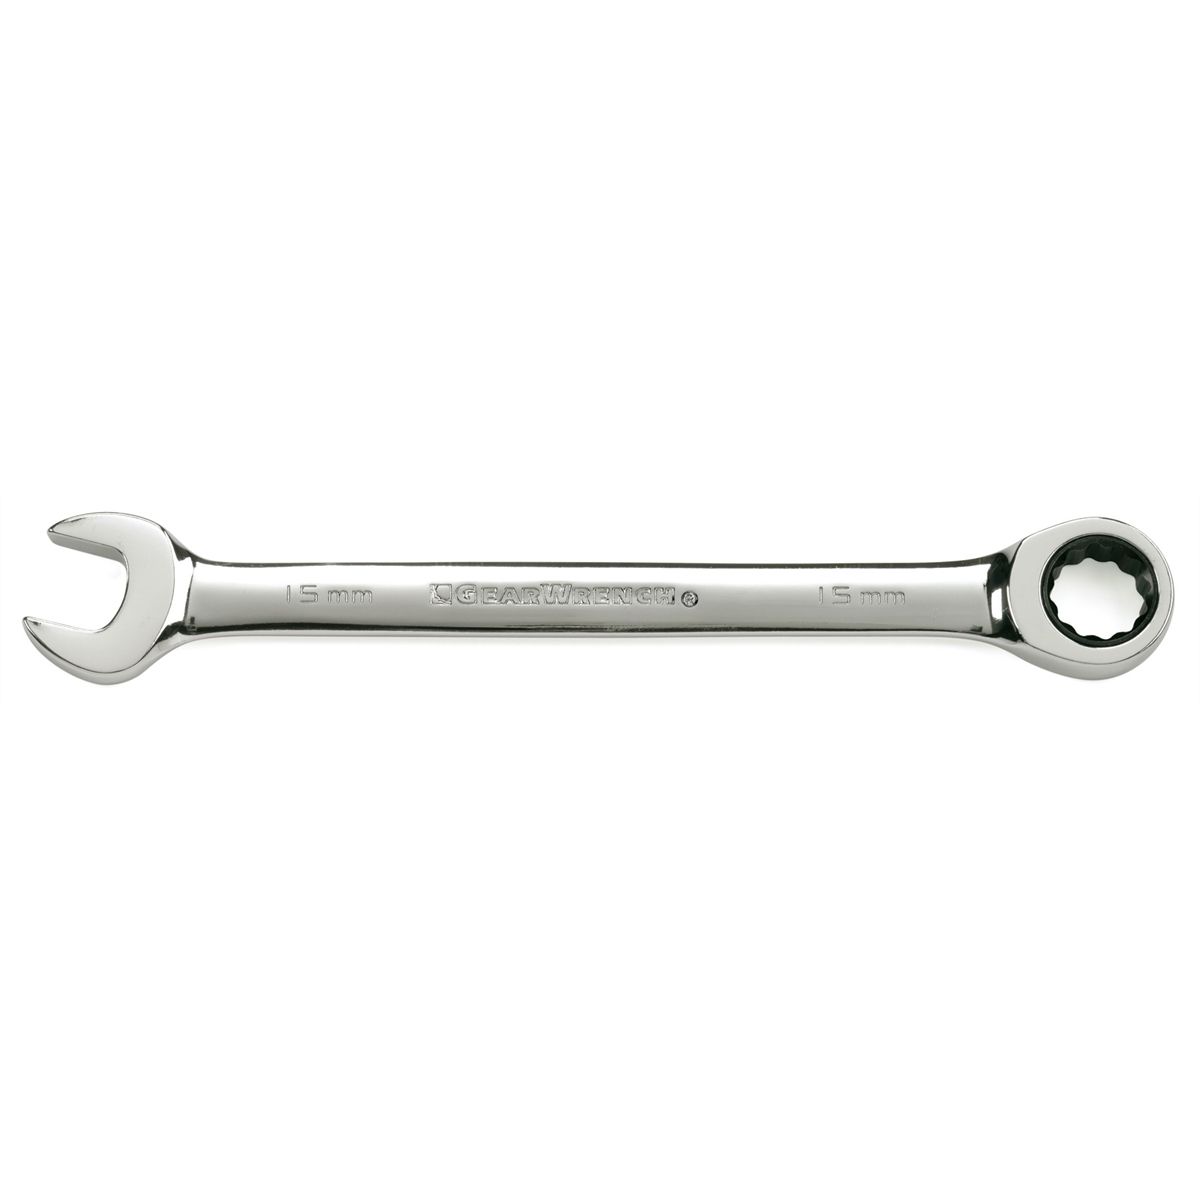 Wrench Ratcheting Combination - 15mm Gearwrench